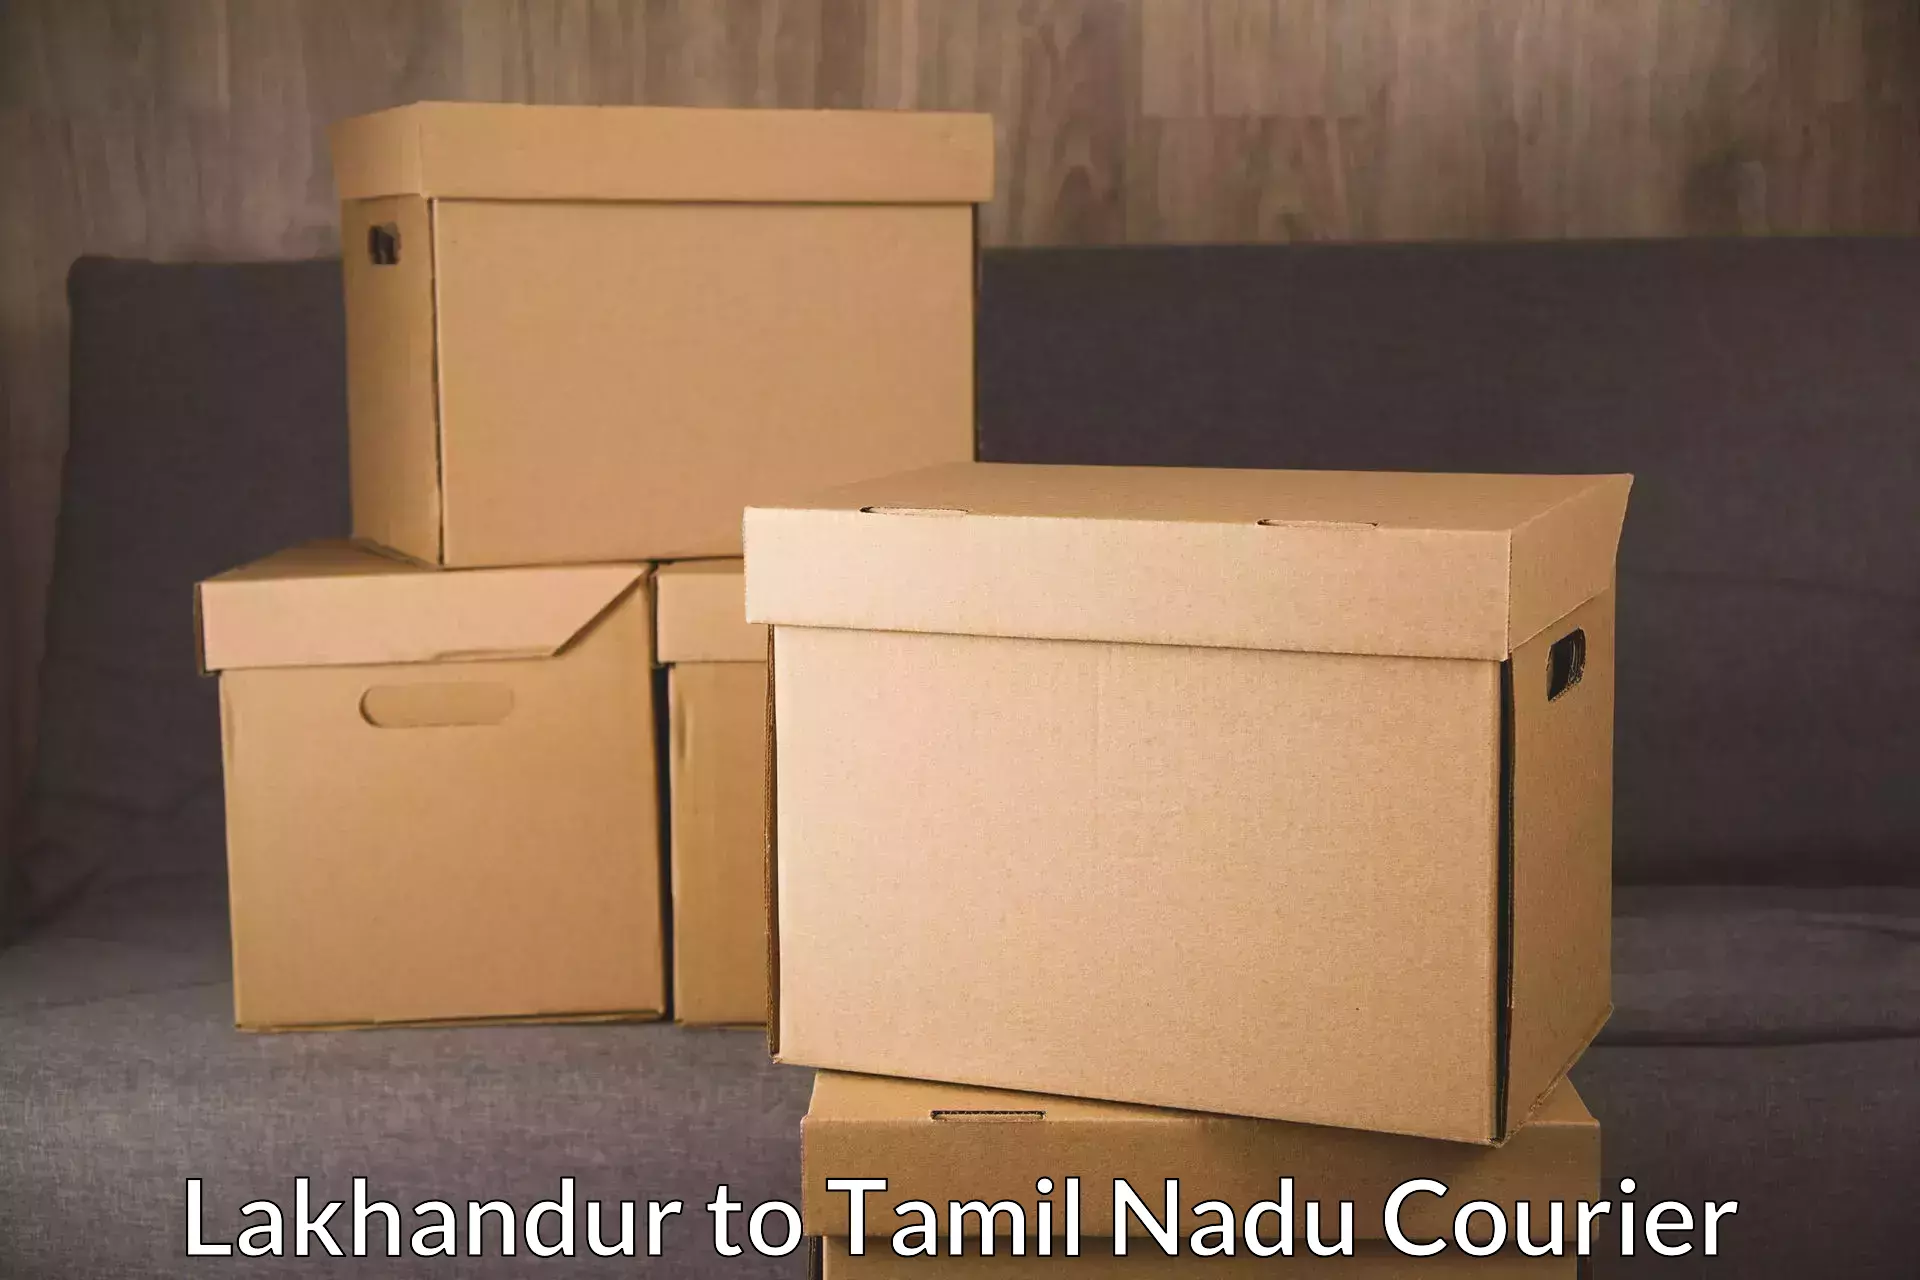 Same-day delivery solutions Lakhandur to Vellore